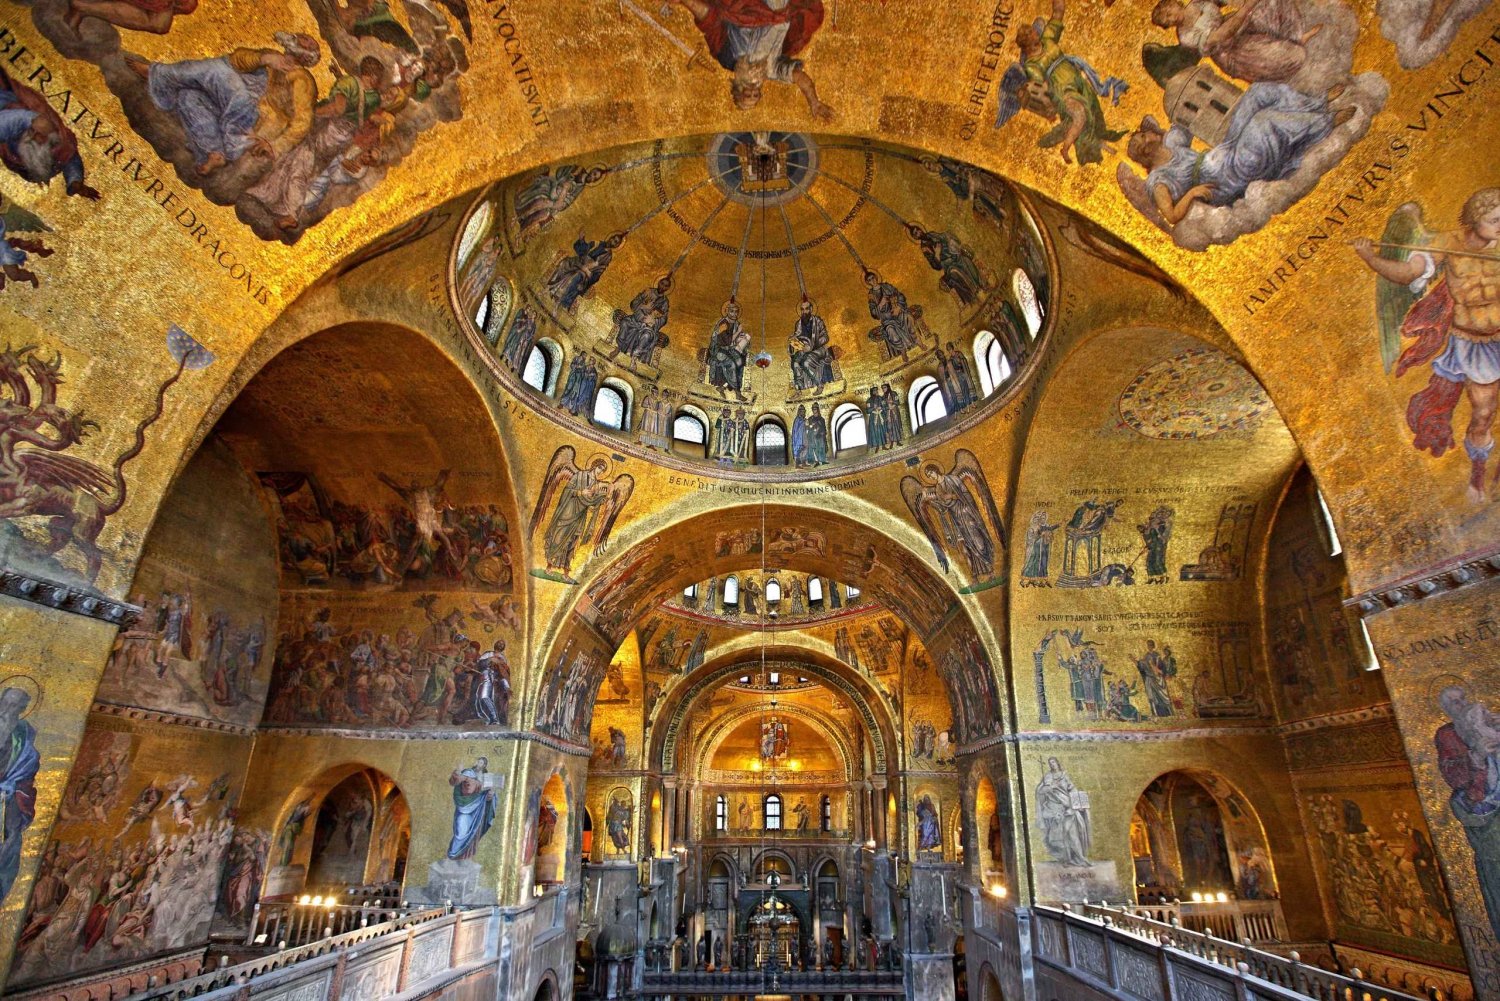 Skip the Line Ticket for St Mark's Basilica & App commentary